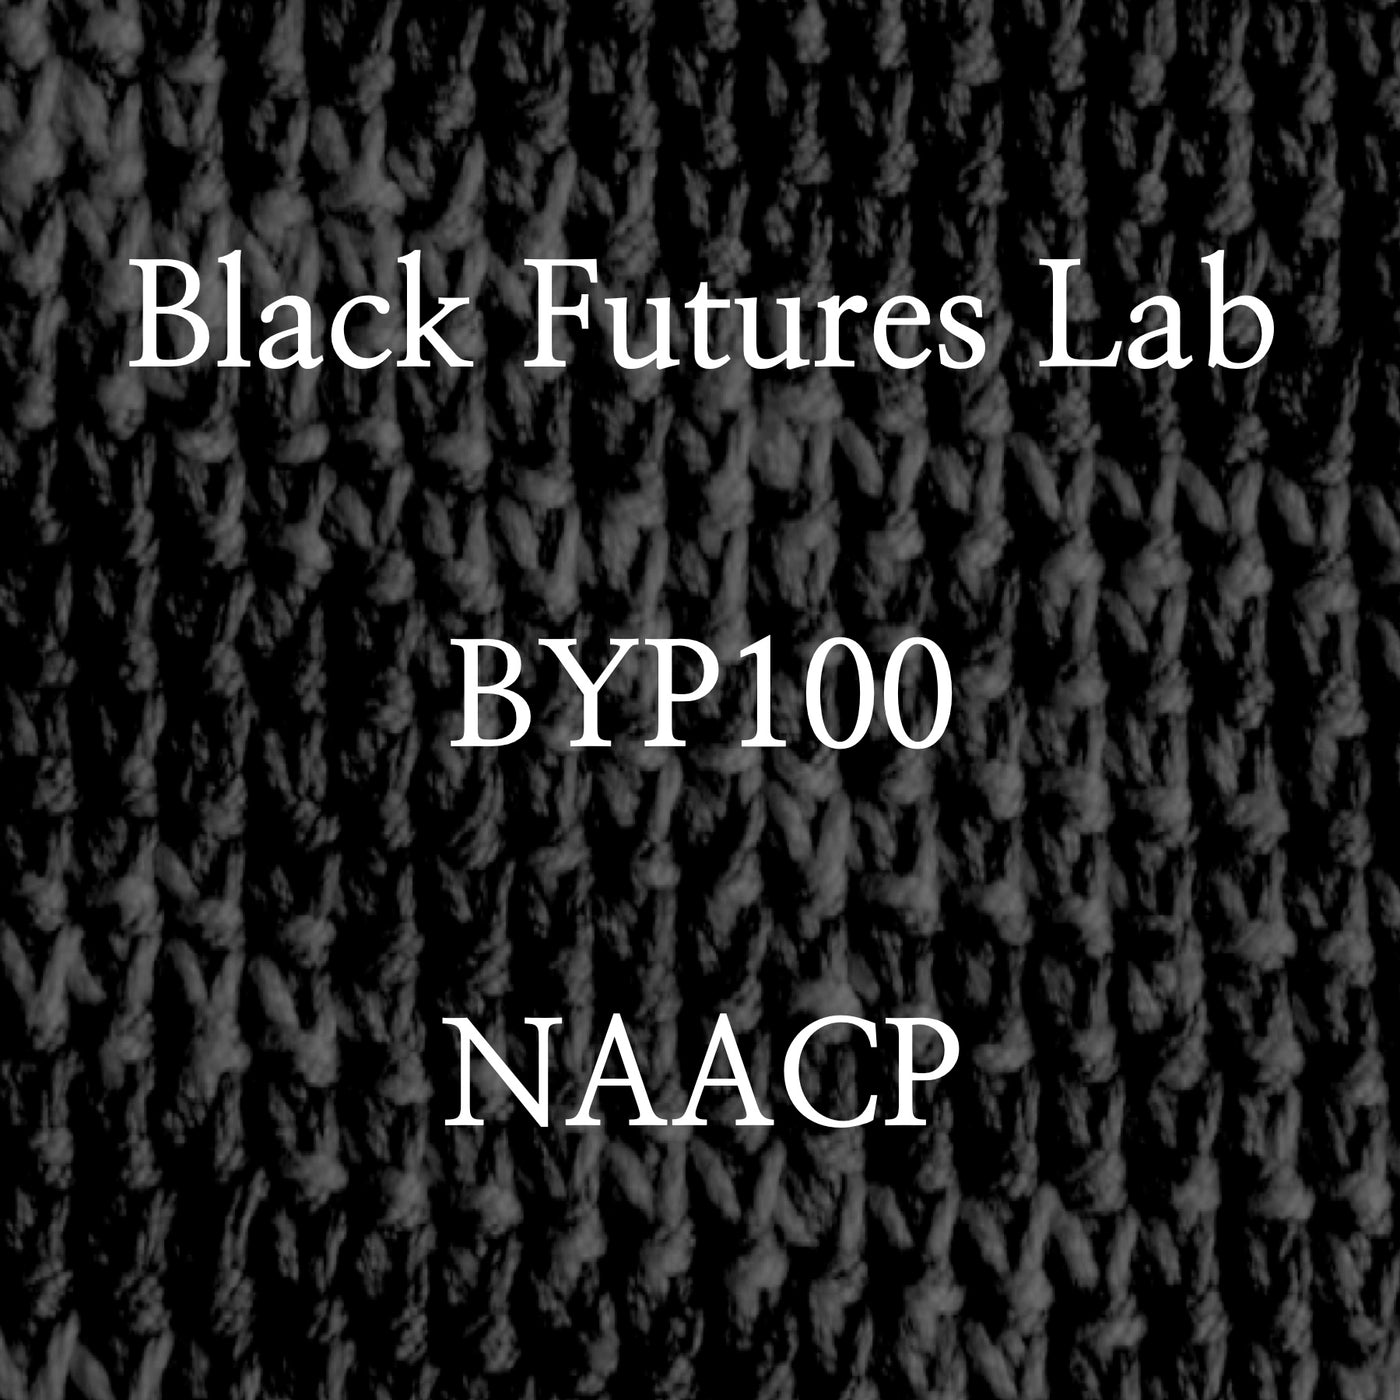 black futures lab byp100 naacp